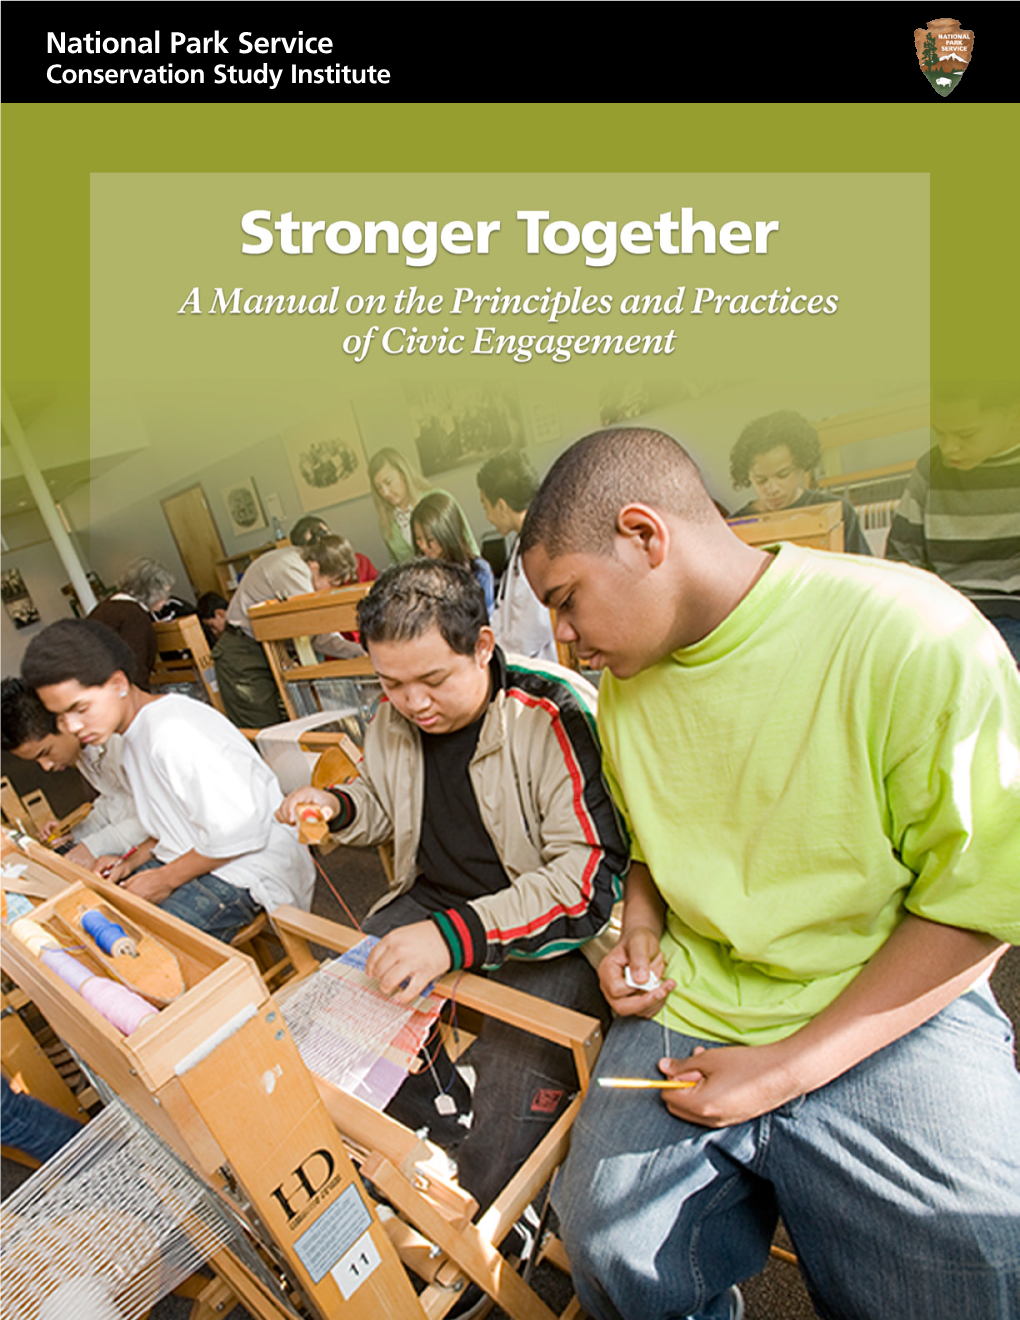 Stronger Together a Manual on the Principles and Practices of Civic